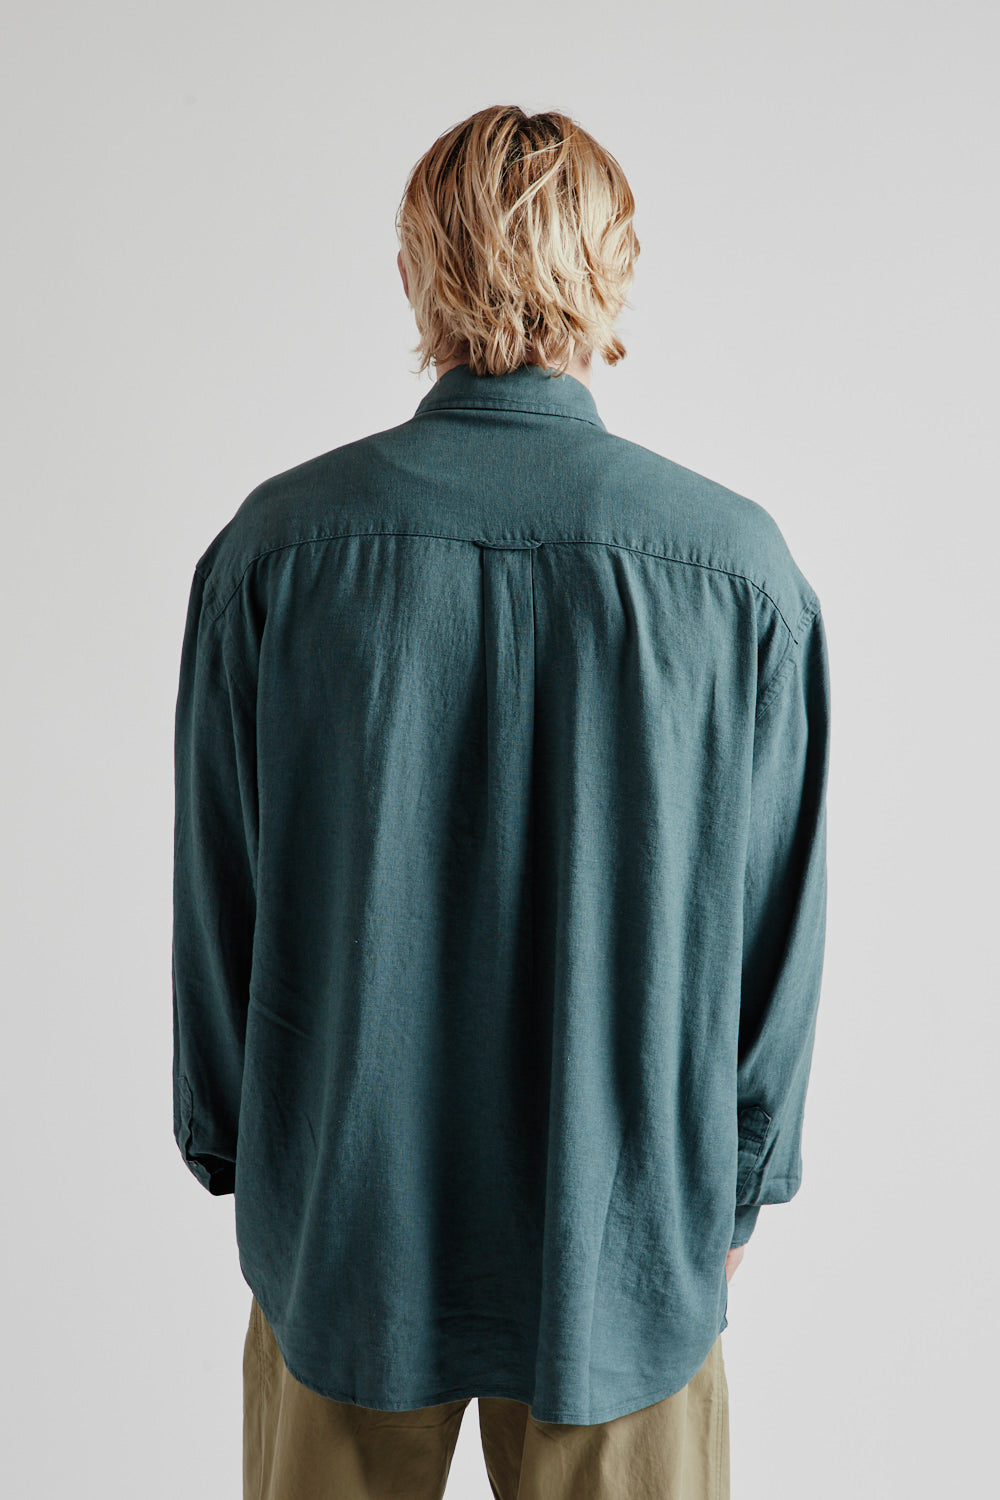 Frizmworks Silky Linen Relaxed Shirt in Teal